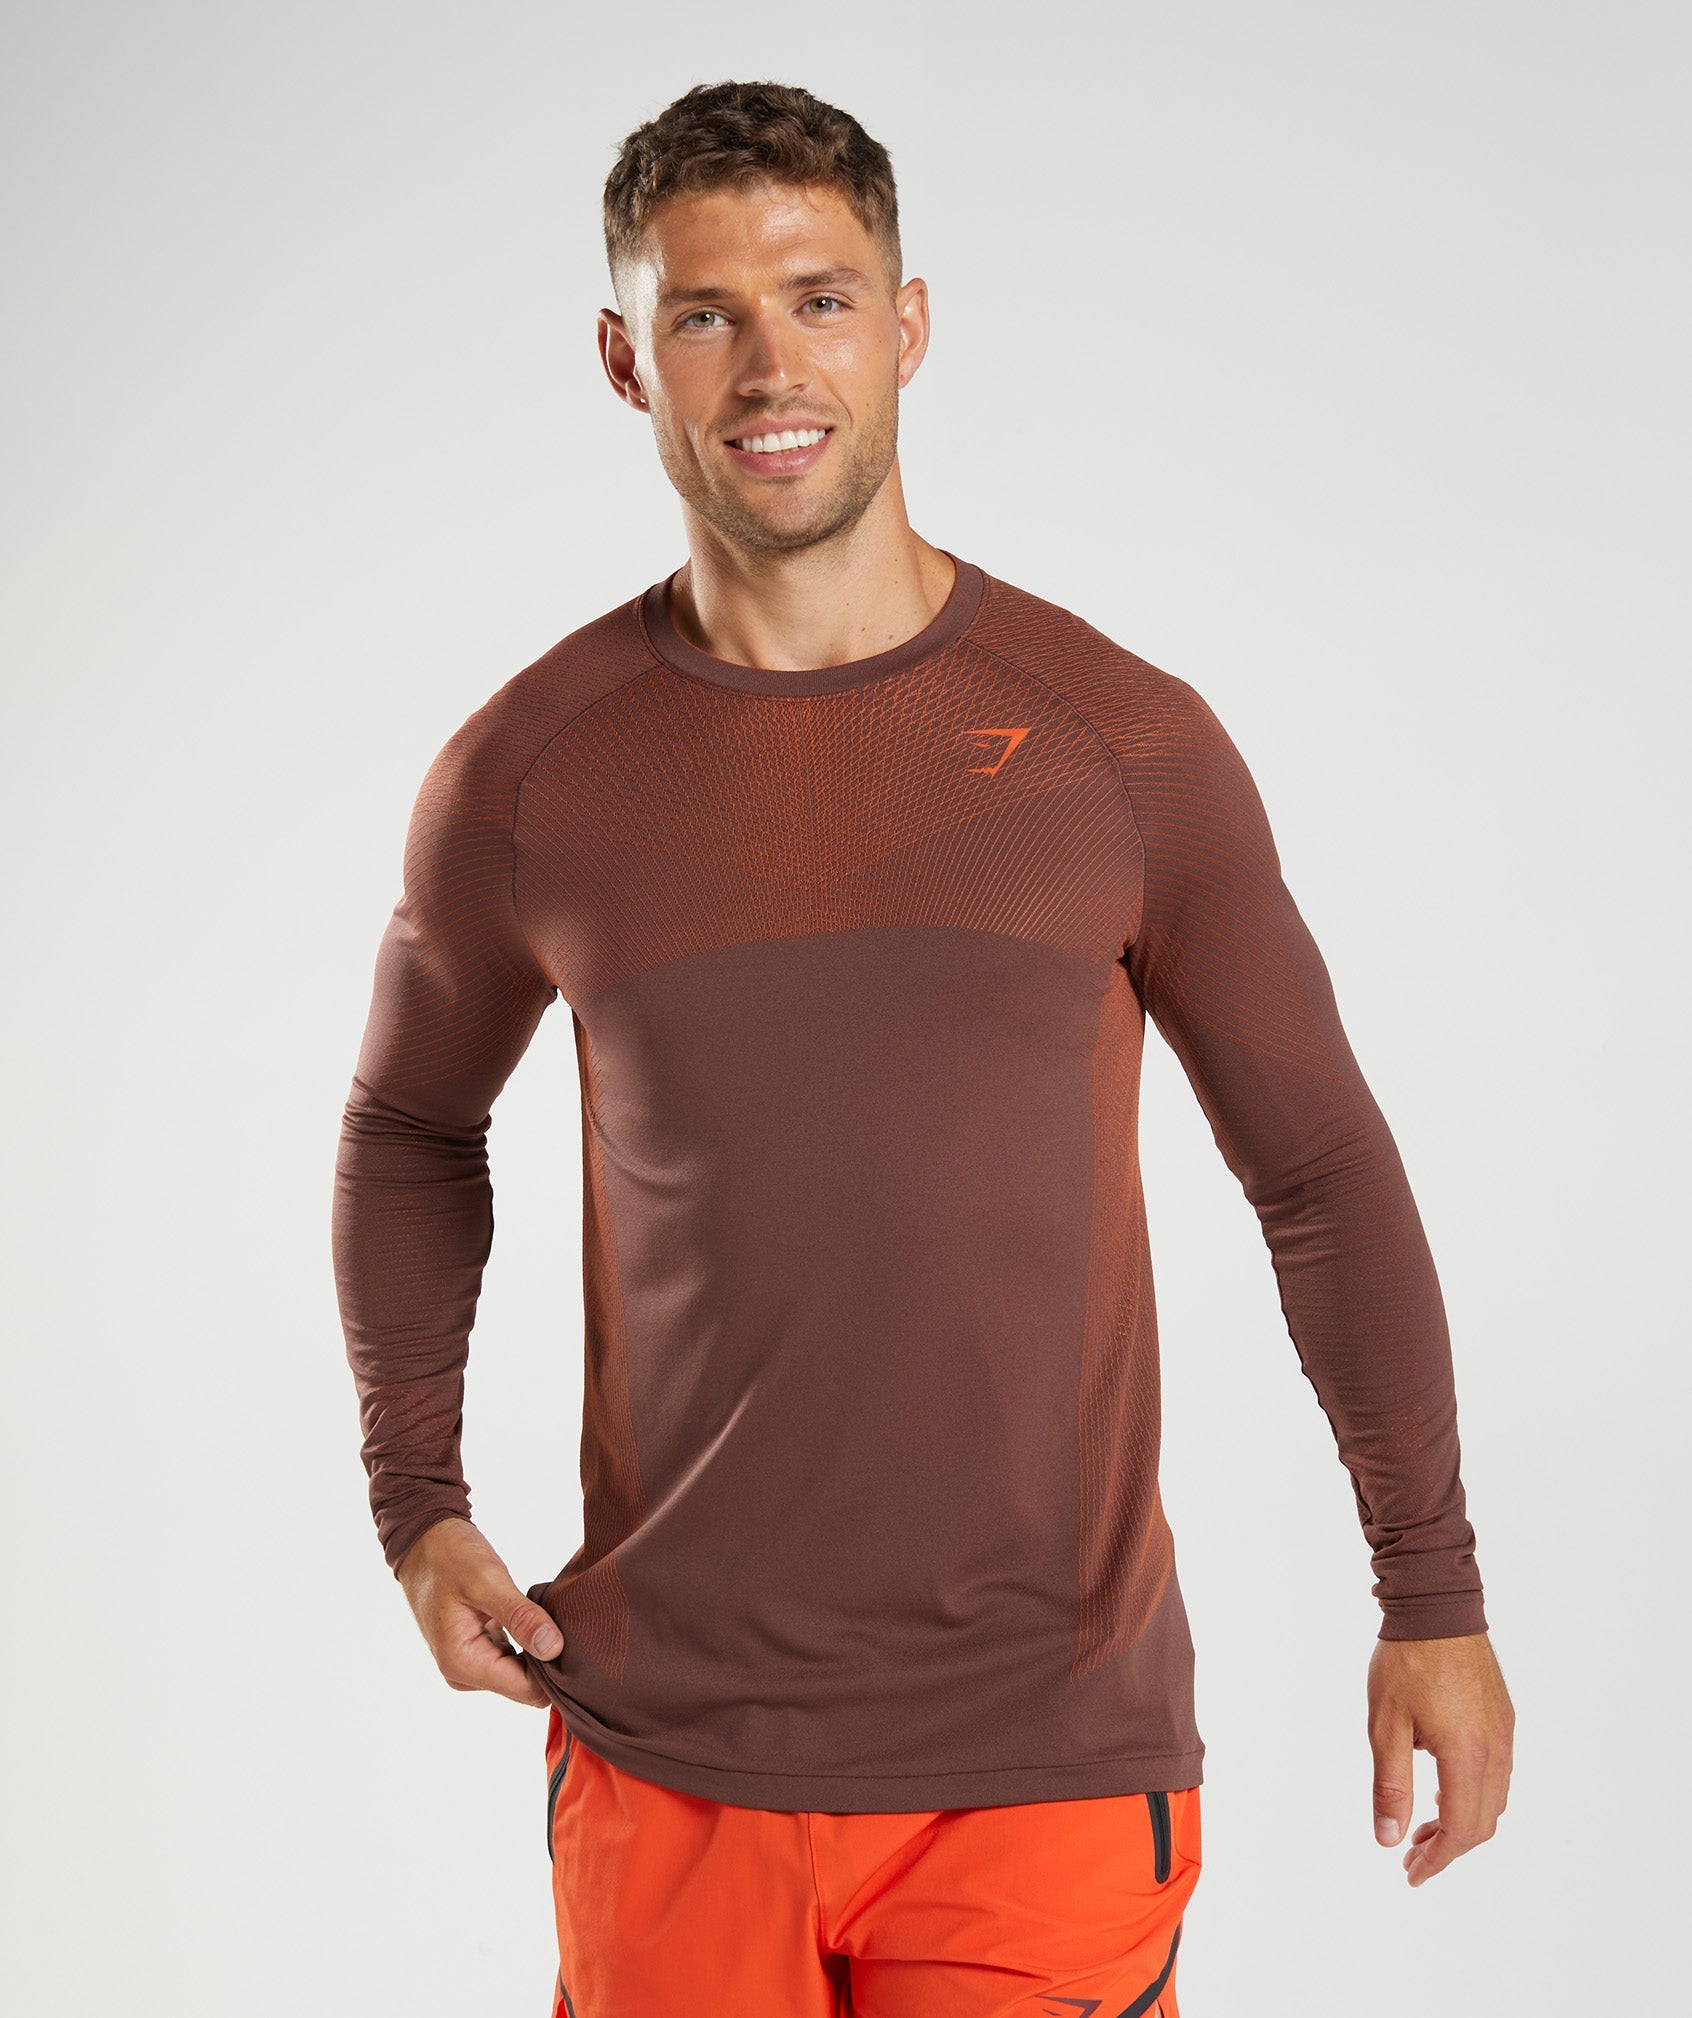 Apex Seamless Long Sleeve T-Shirt in Cherry Brown/Pepper Red - view 1